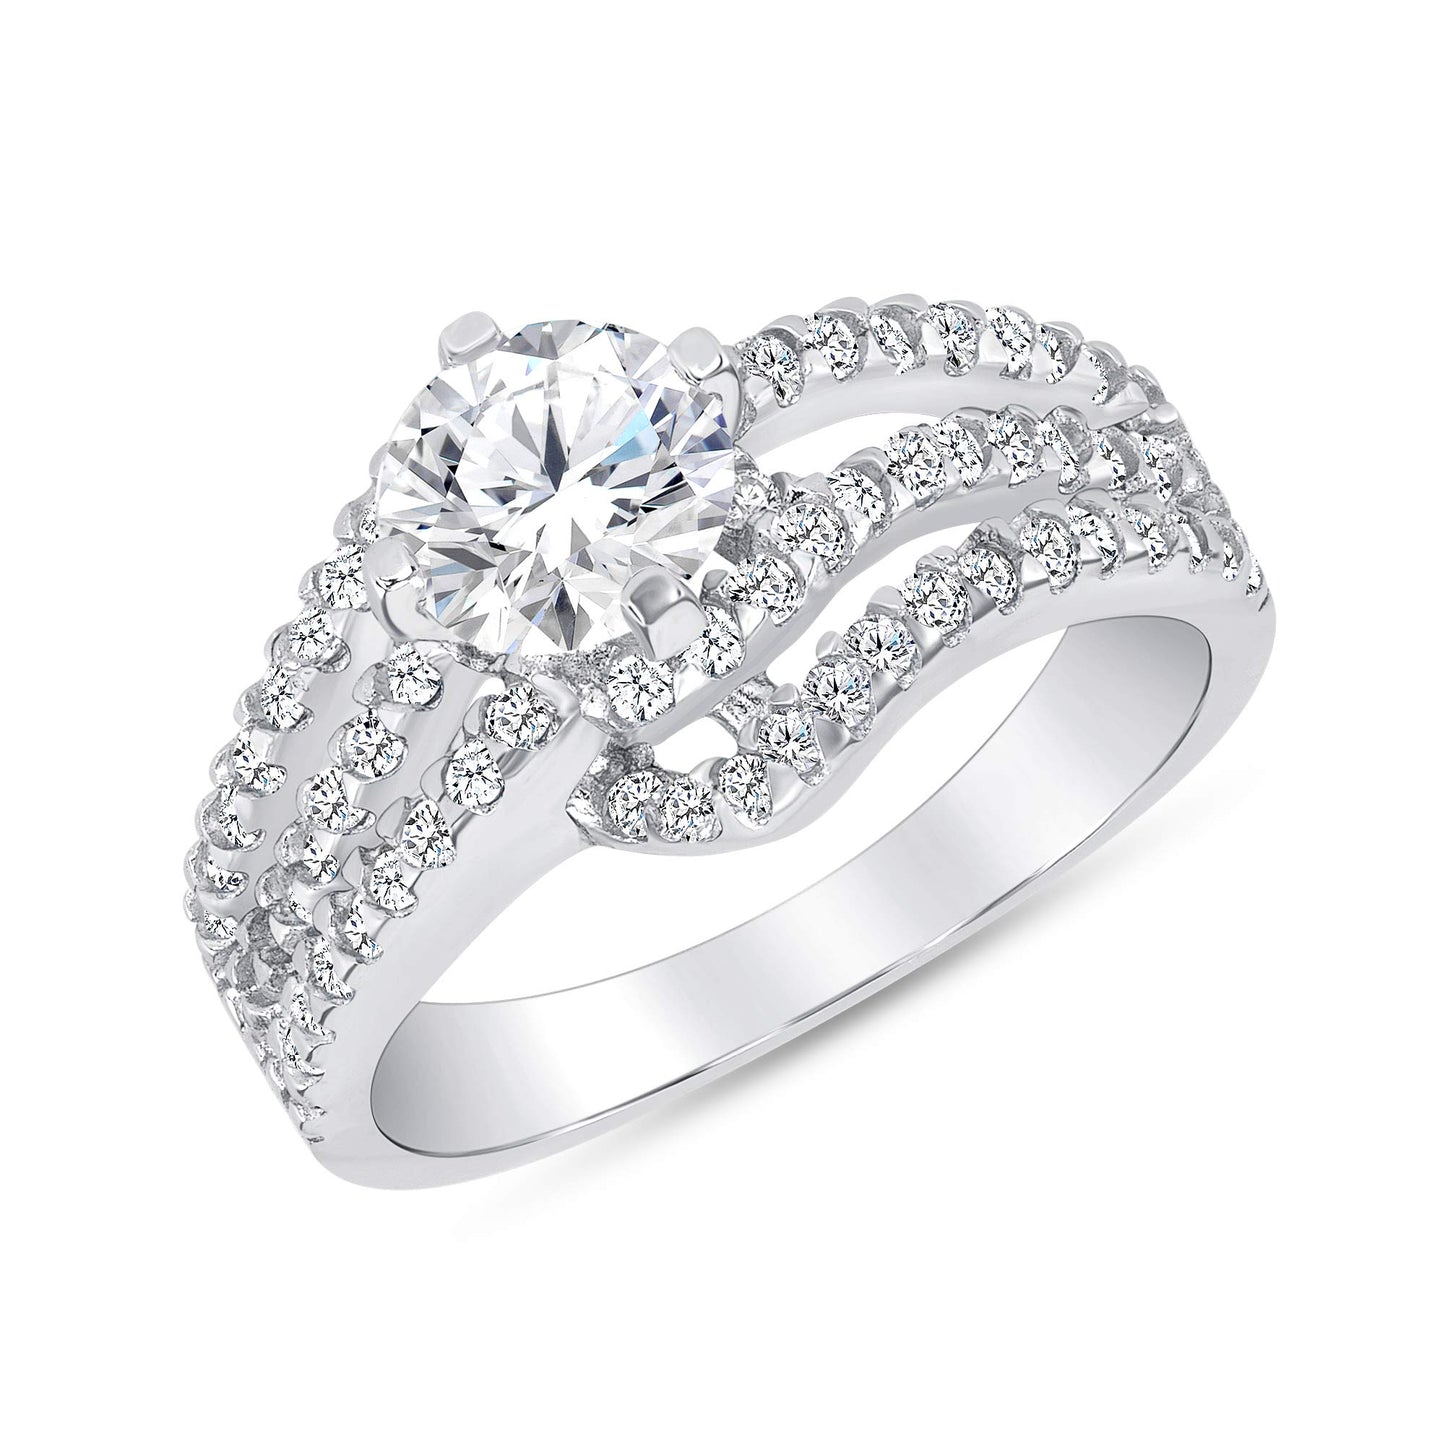 Sterling Silver 3 Strand Cz Solitaire Ring